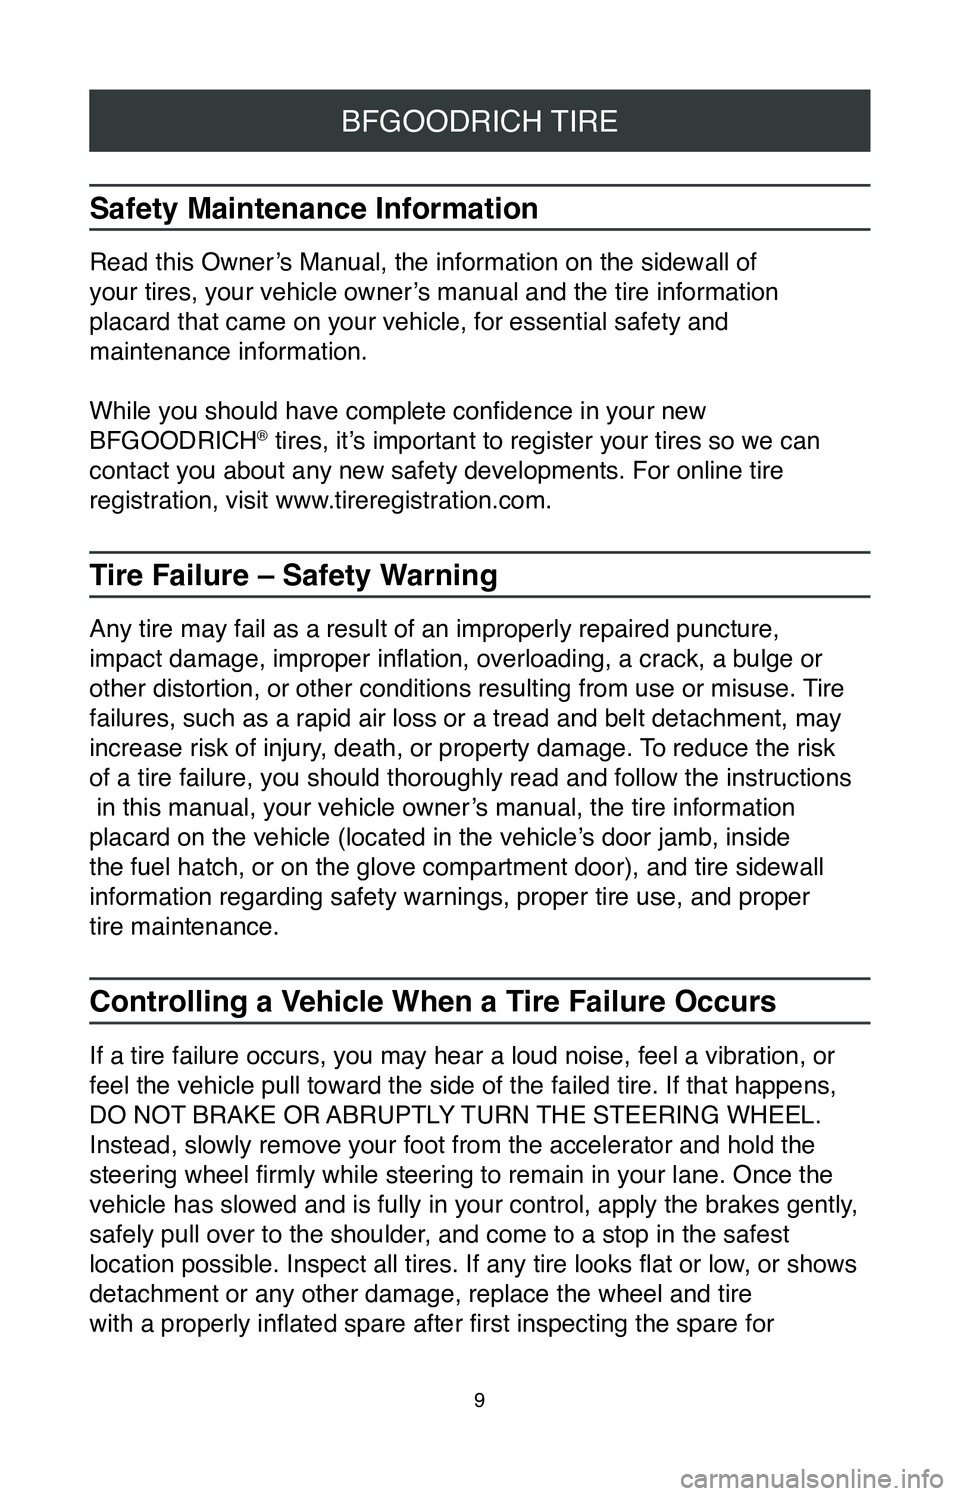 TOYOTA AVALON HYBRID 2020  Warranties & Maintenance Guides (in English) 9
BFGOODRICH TIRE
Safety Maintenance Information
Read this Owner’s Manual, the information on the sidewall of  
your tires, your vehicle owner’s manual and the tire information   
placard that cam